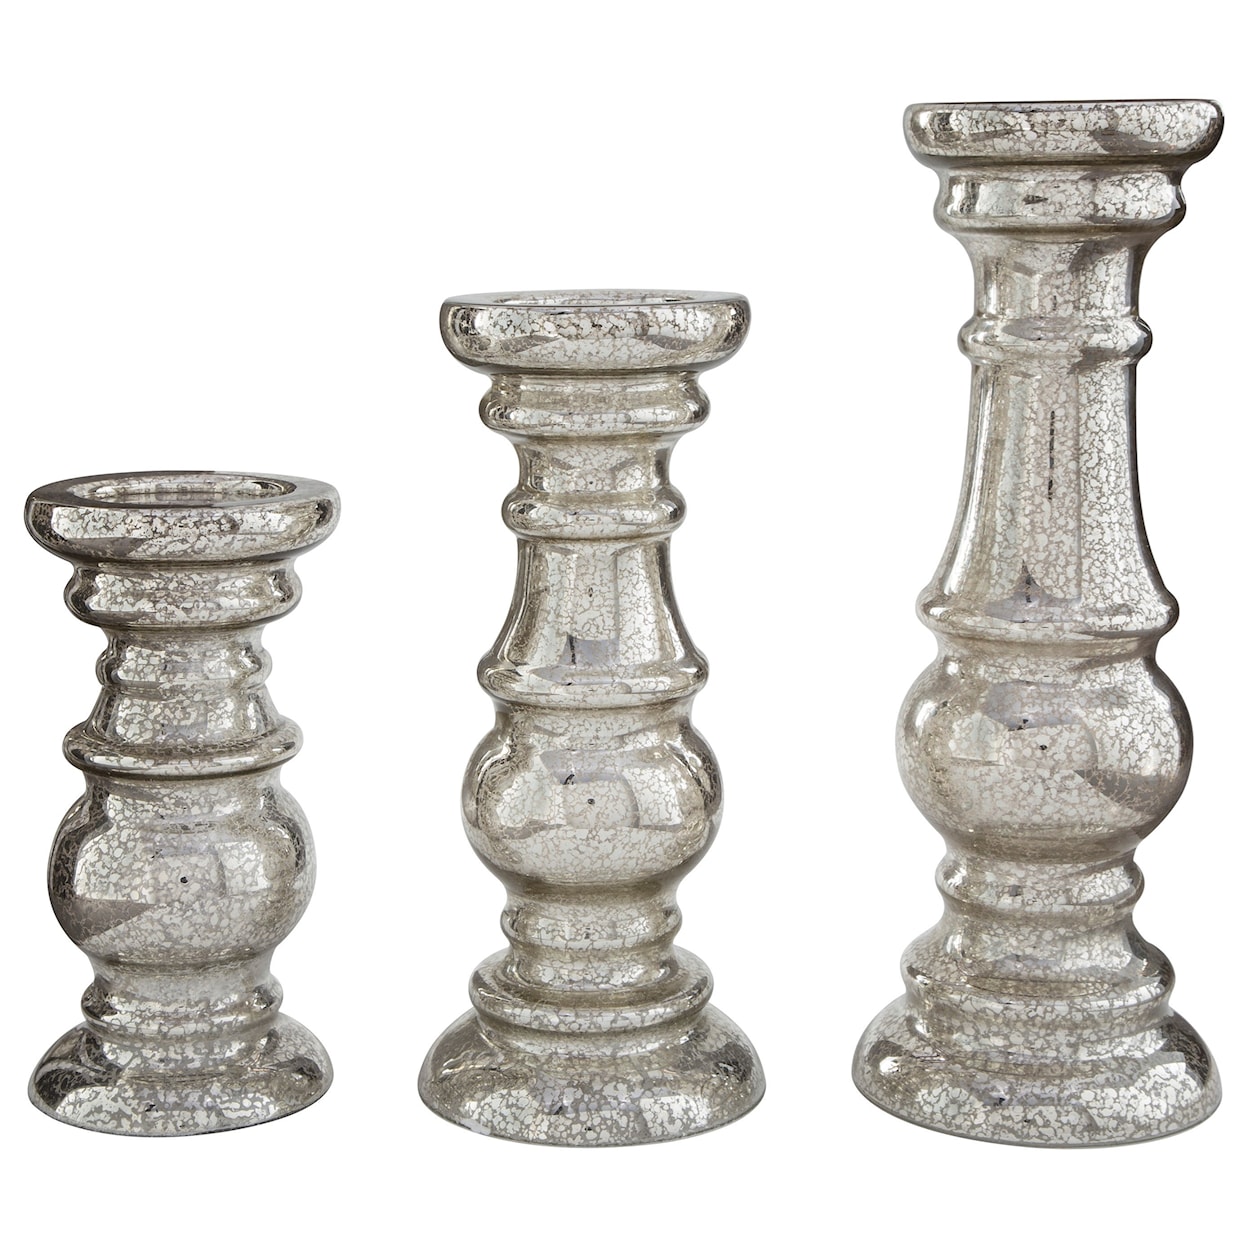 Benchcraft Accents Rosario Silver Finish Candle Holder Set